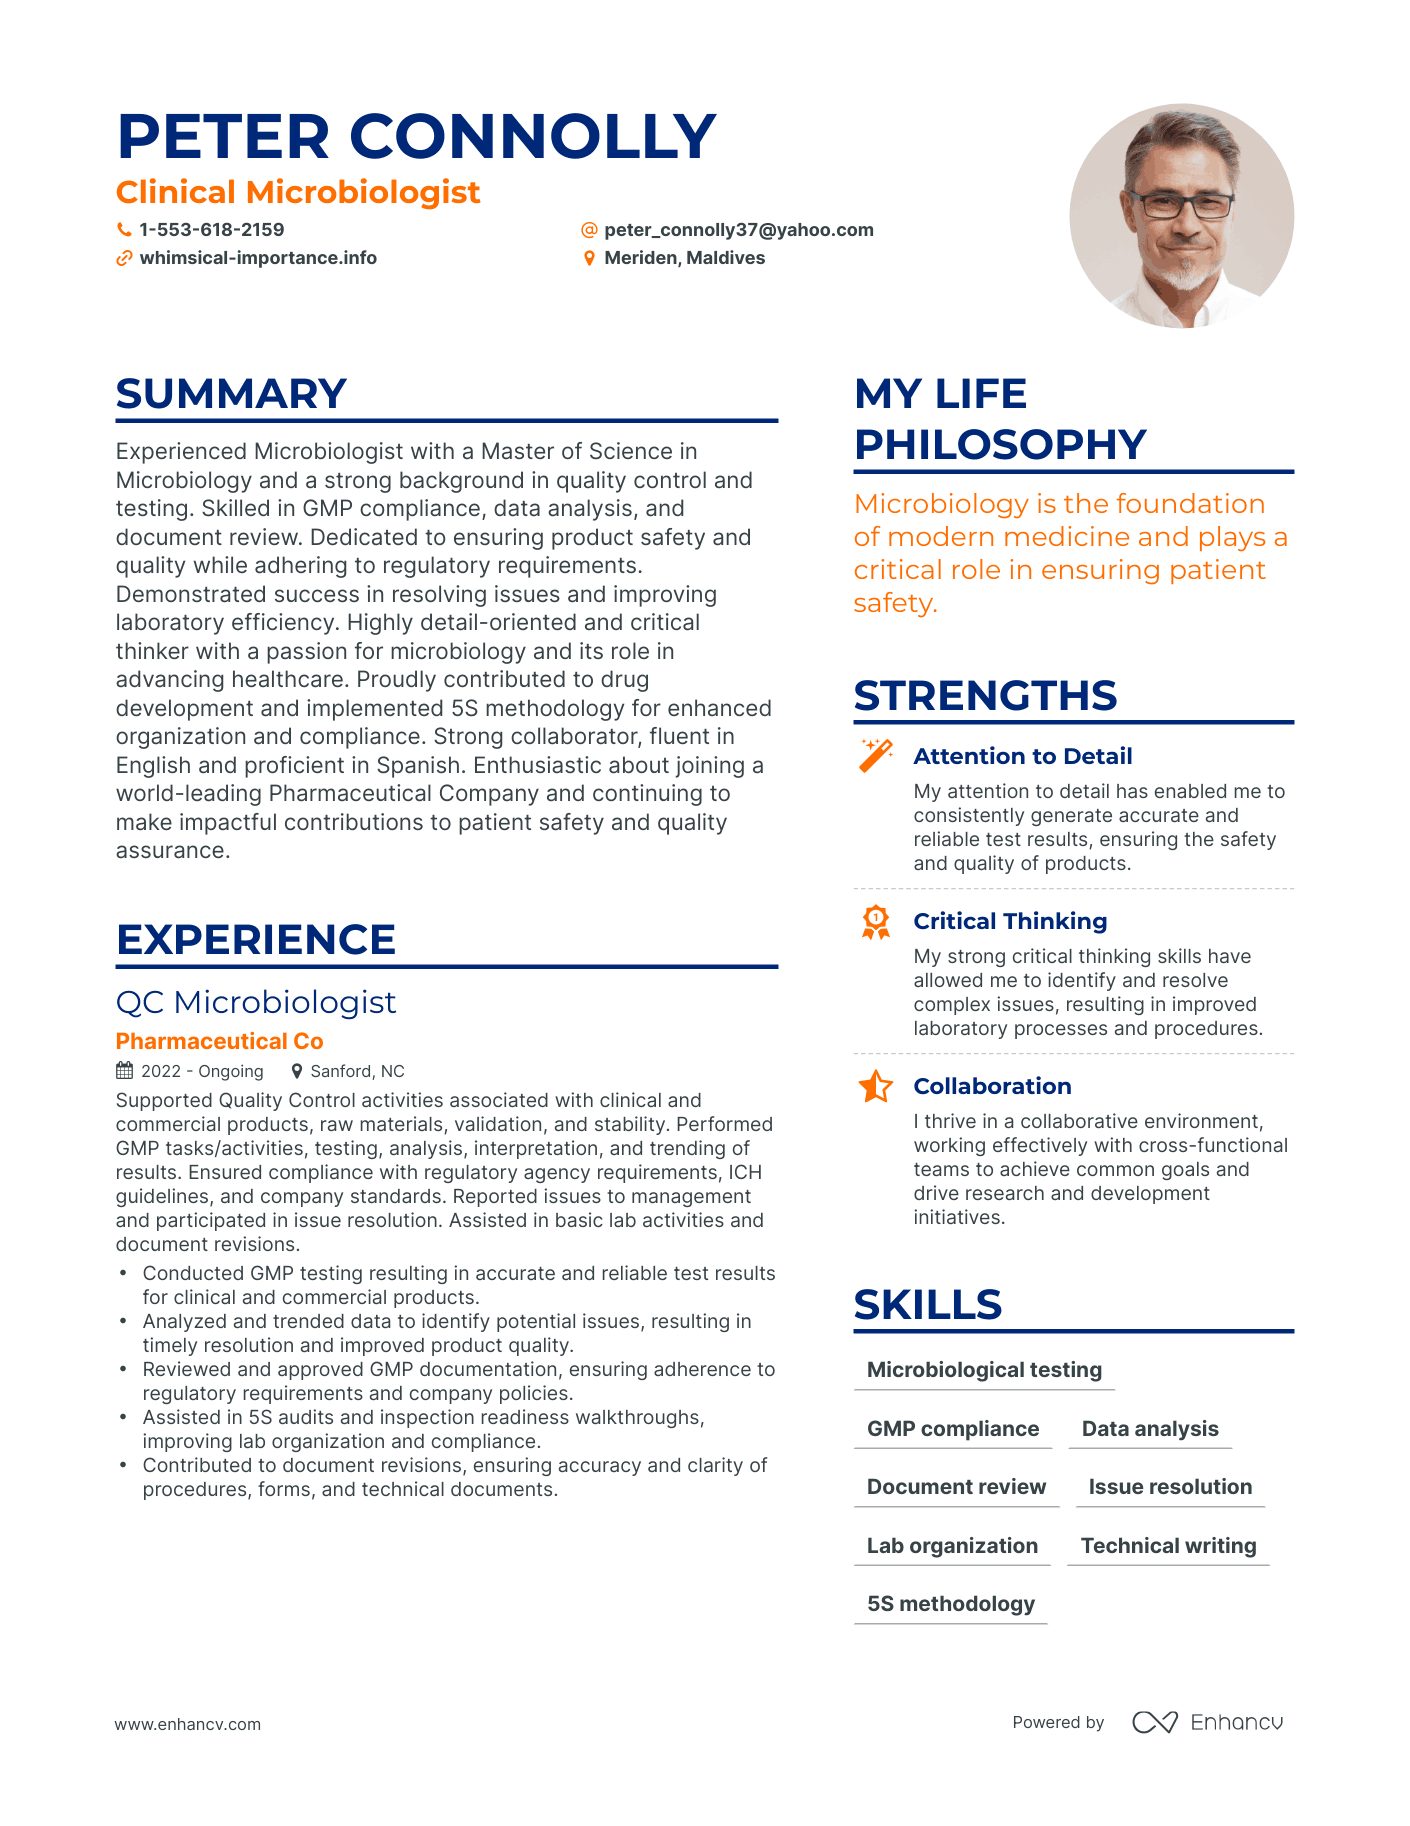 Clinical Microbiologist resume example